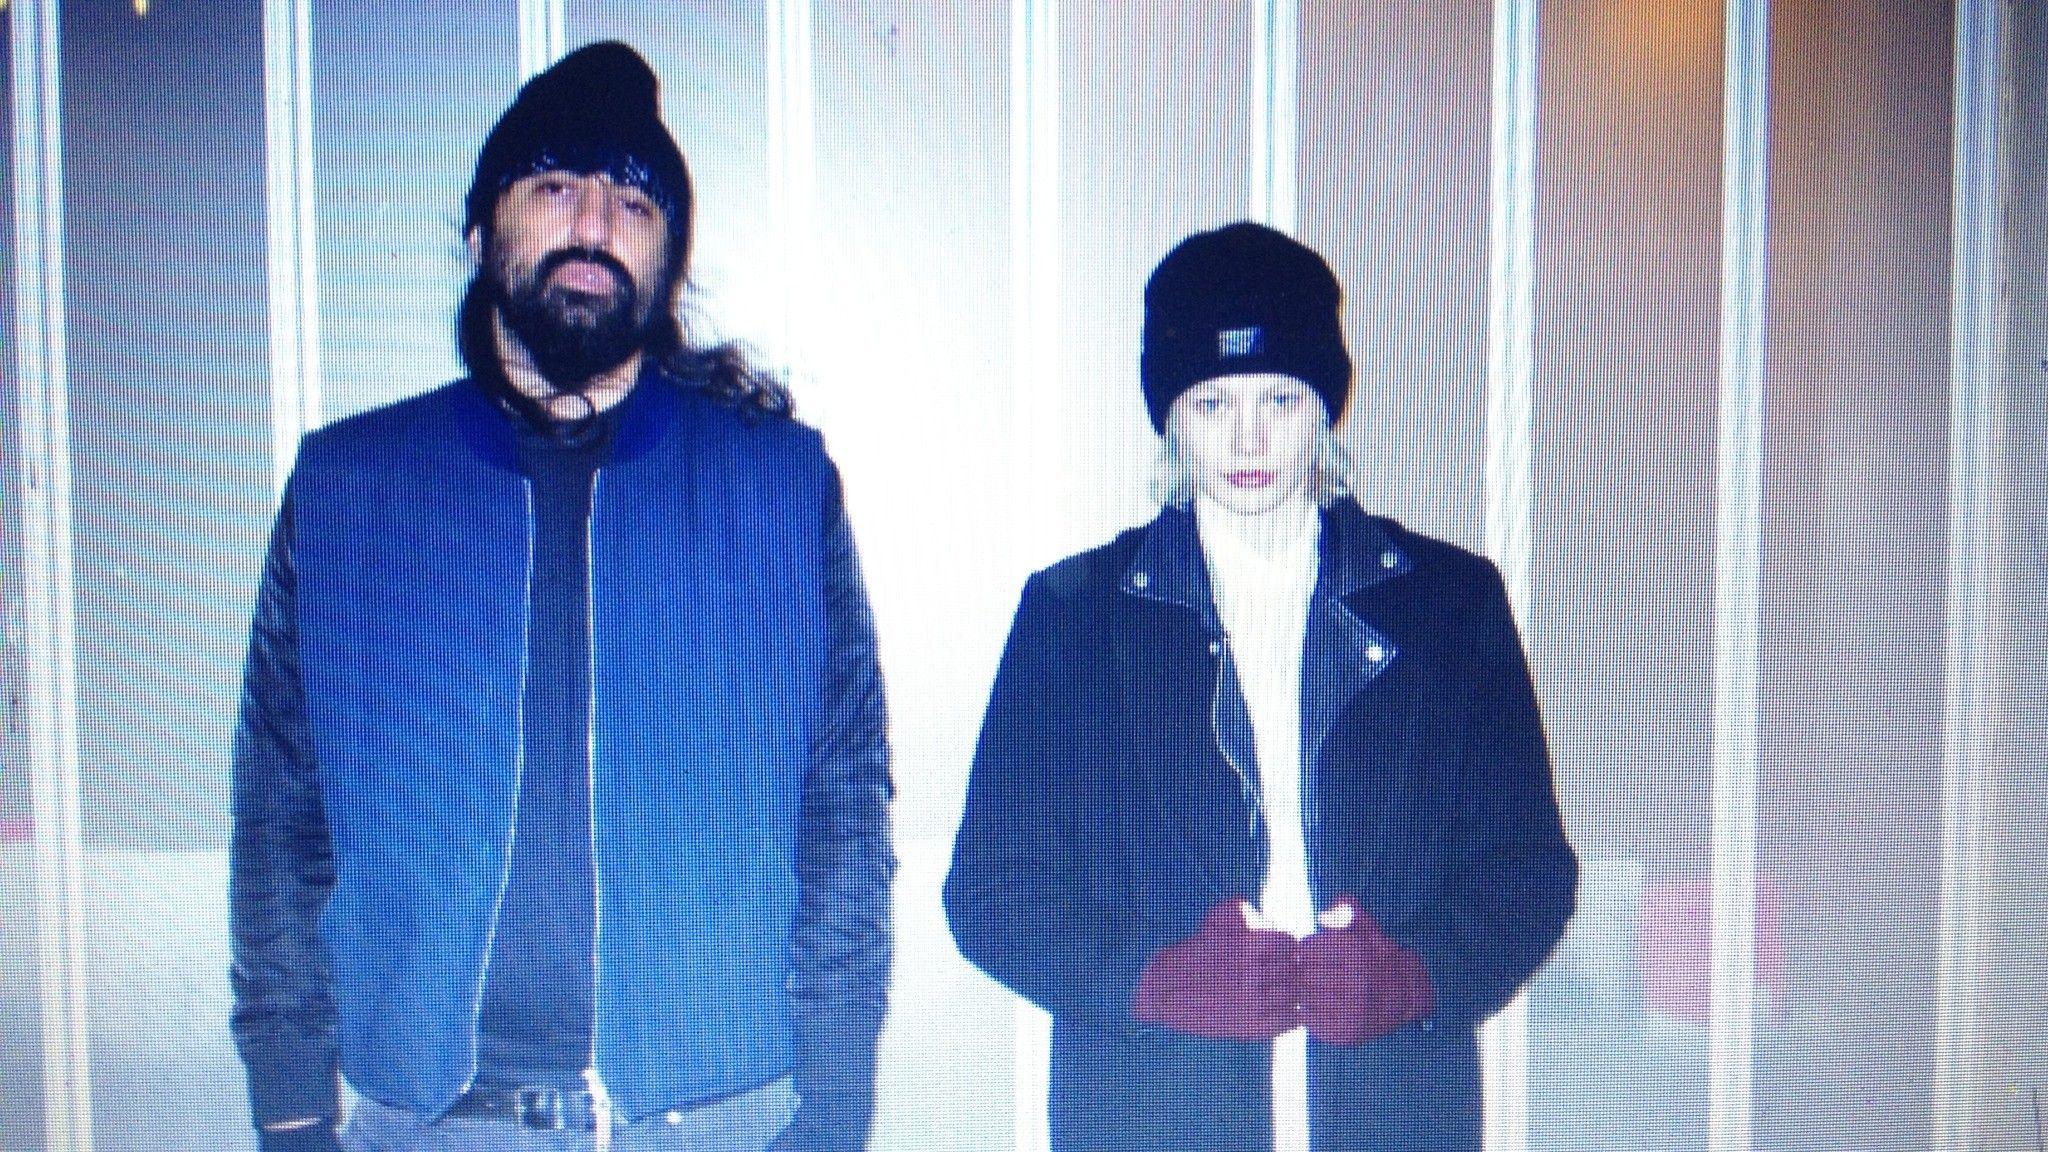 Crystal Castles. House of Blues. Pop. Dallas News and Events